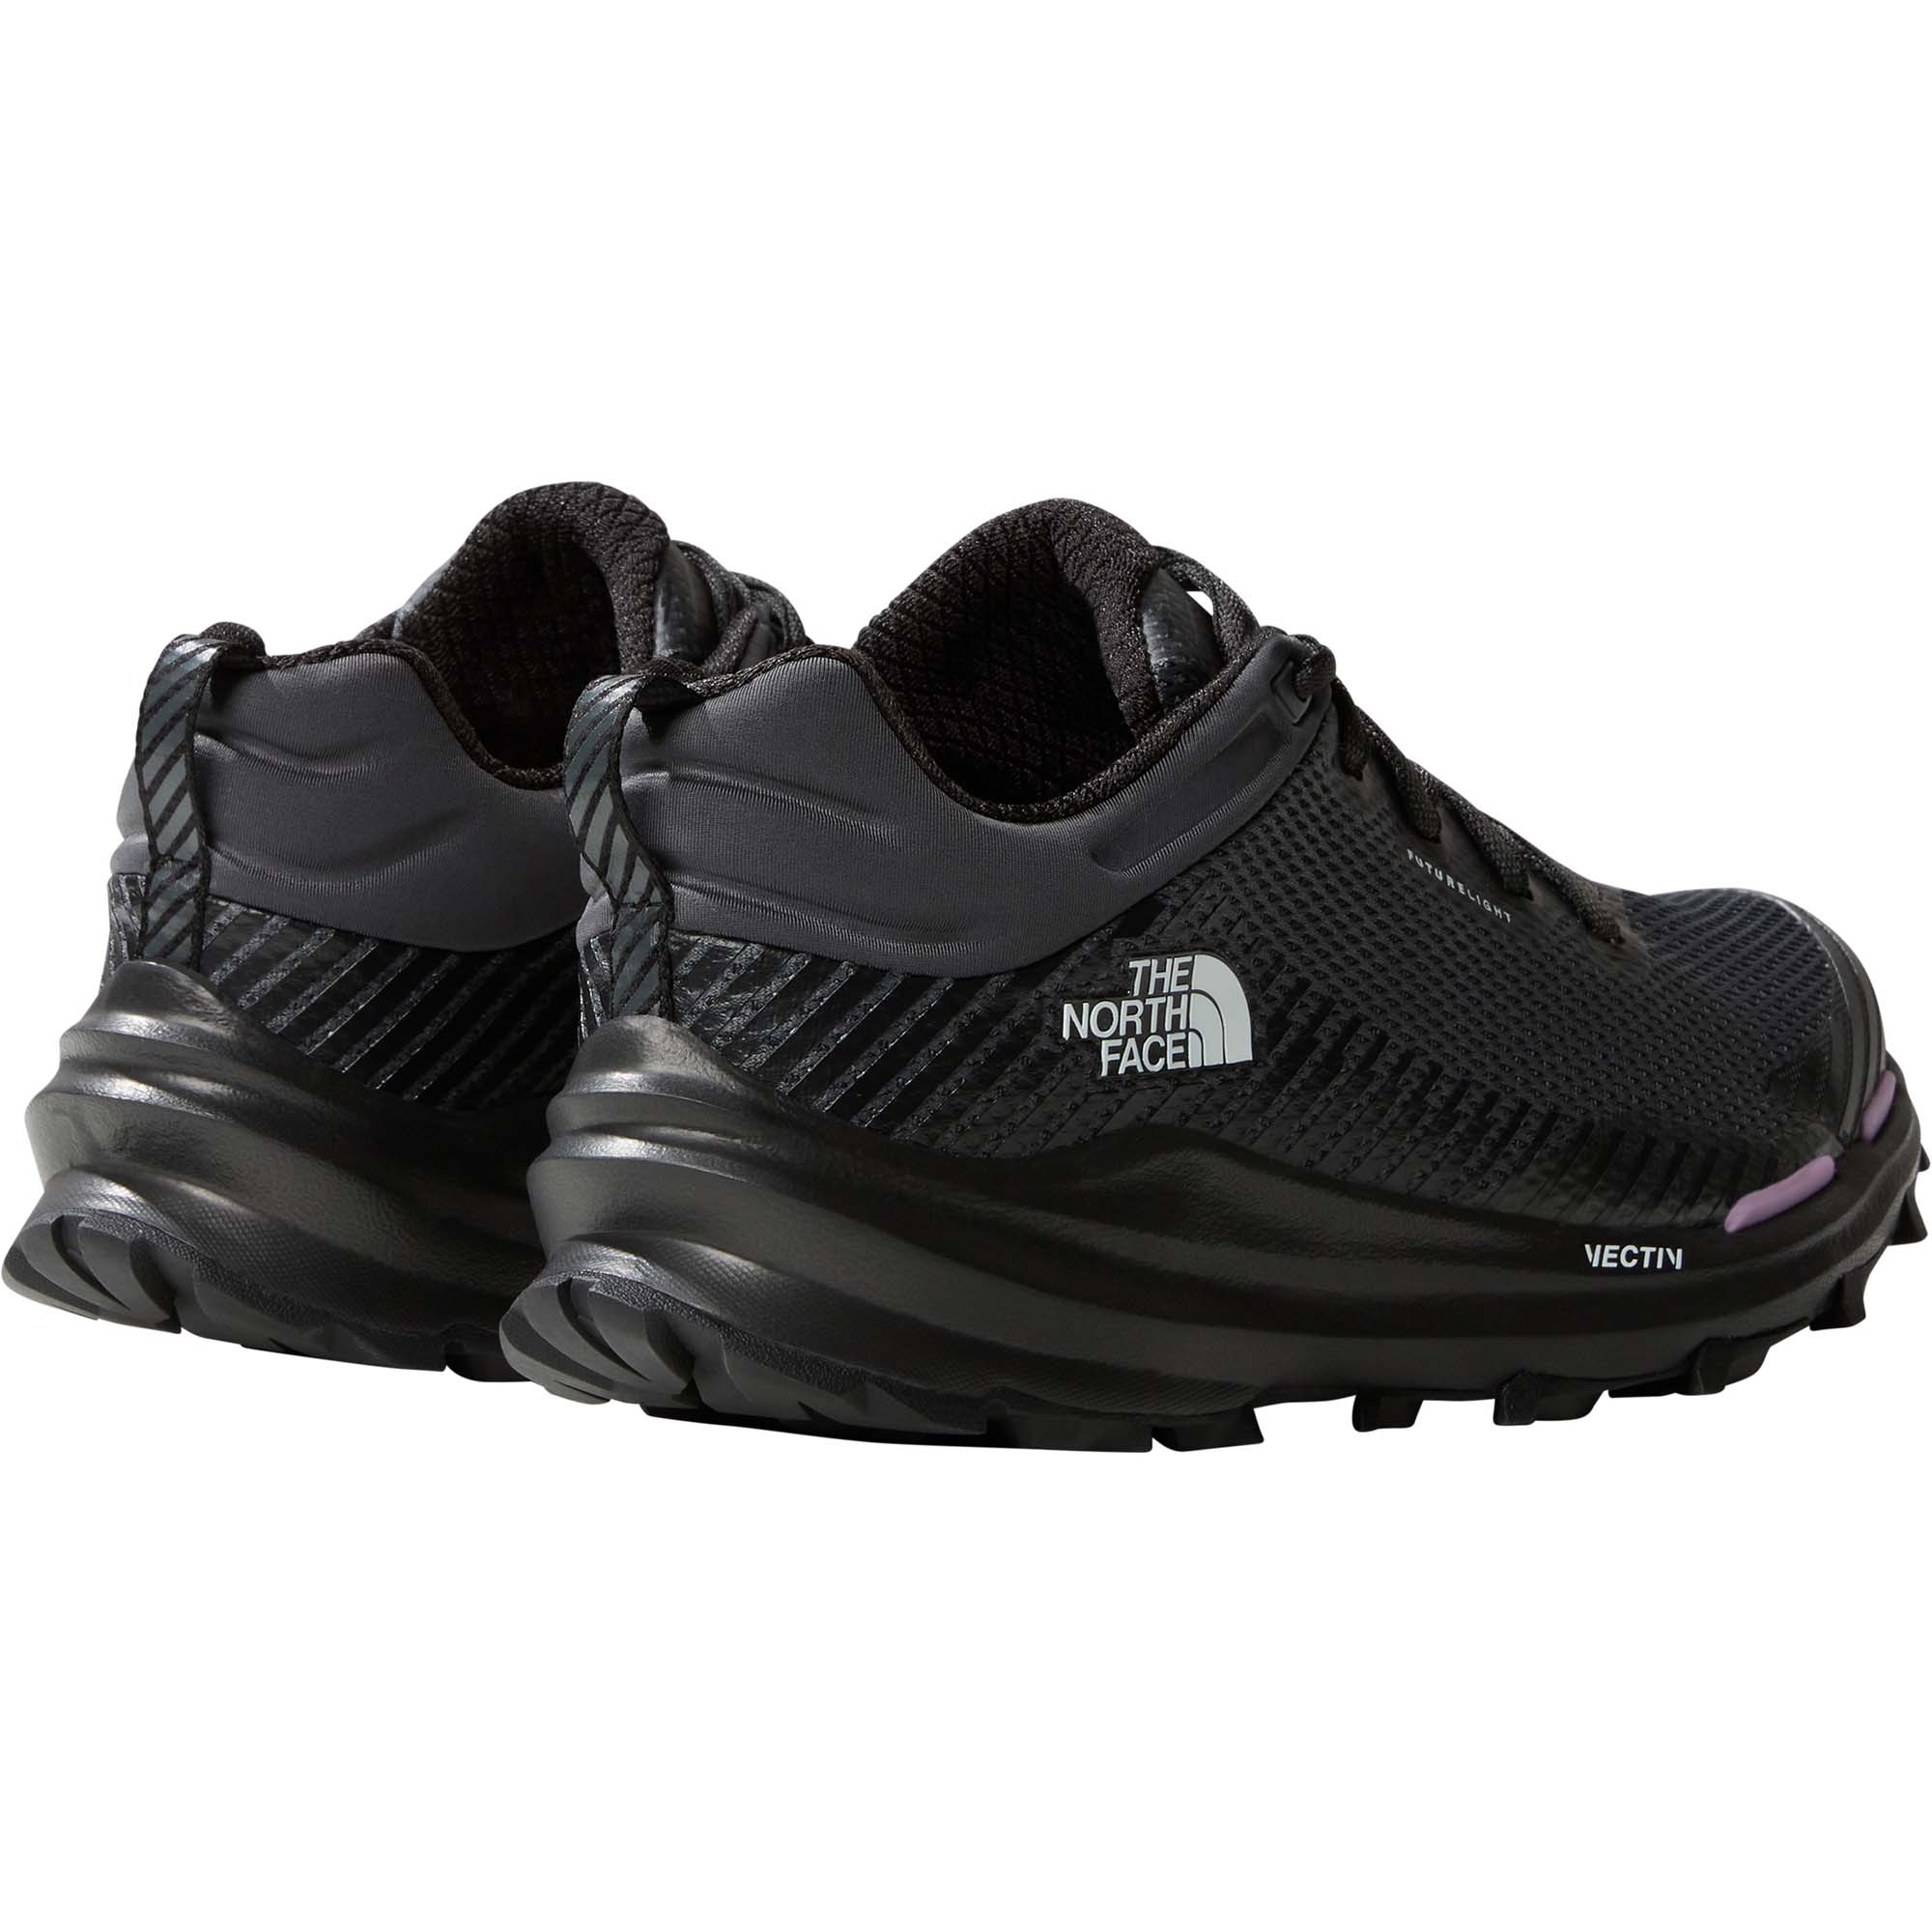 The North Face Vectiv Fastpack FL Women's Hiking Shoes